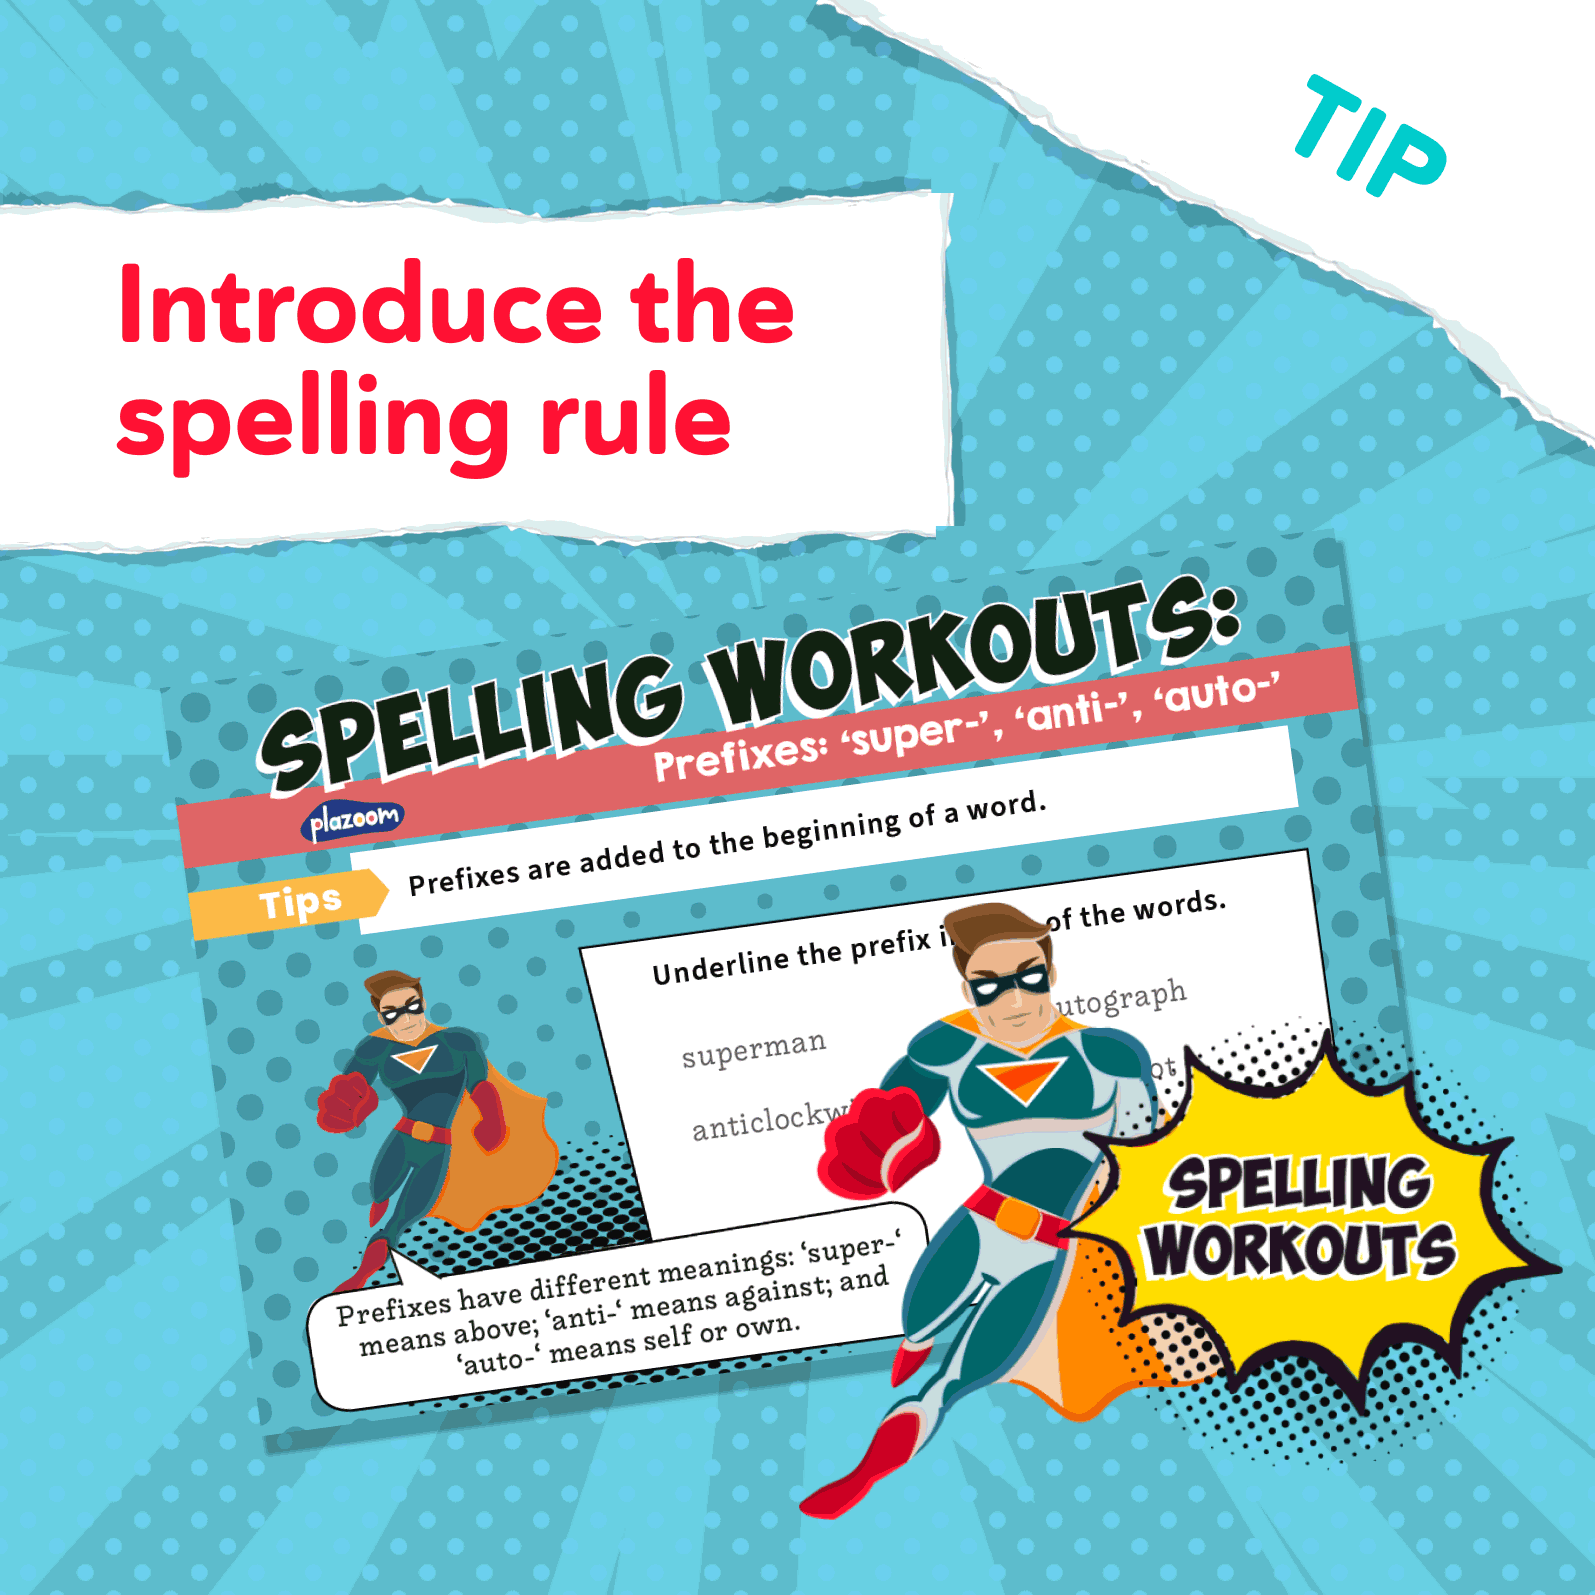 Main Image for A quick guide to Spelling Workouts